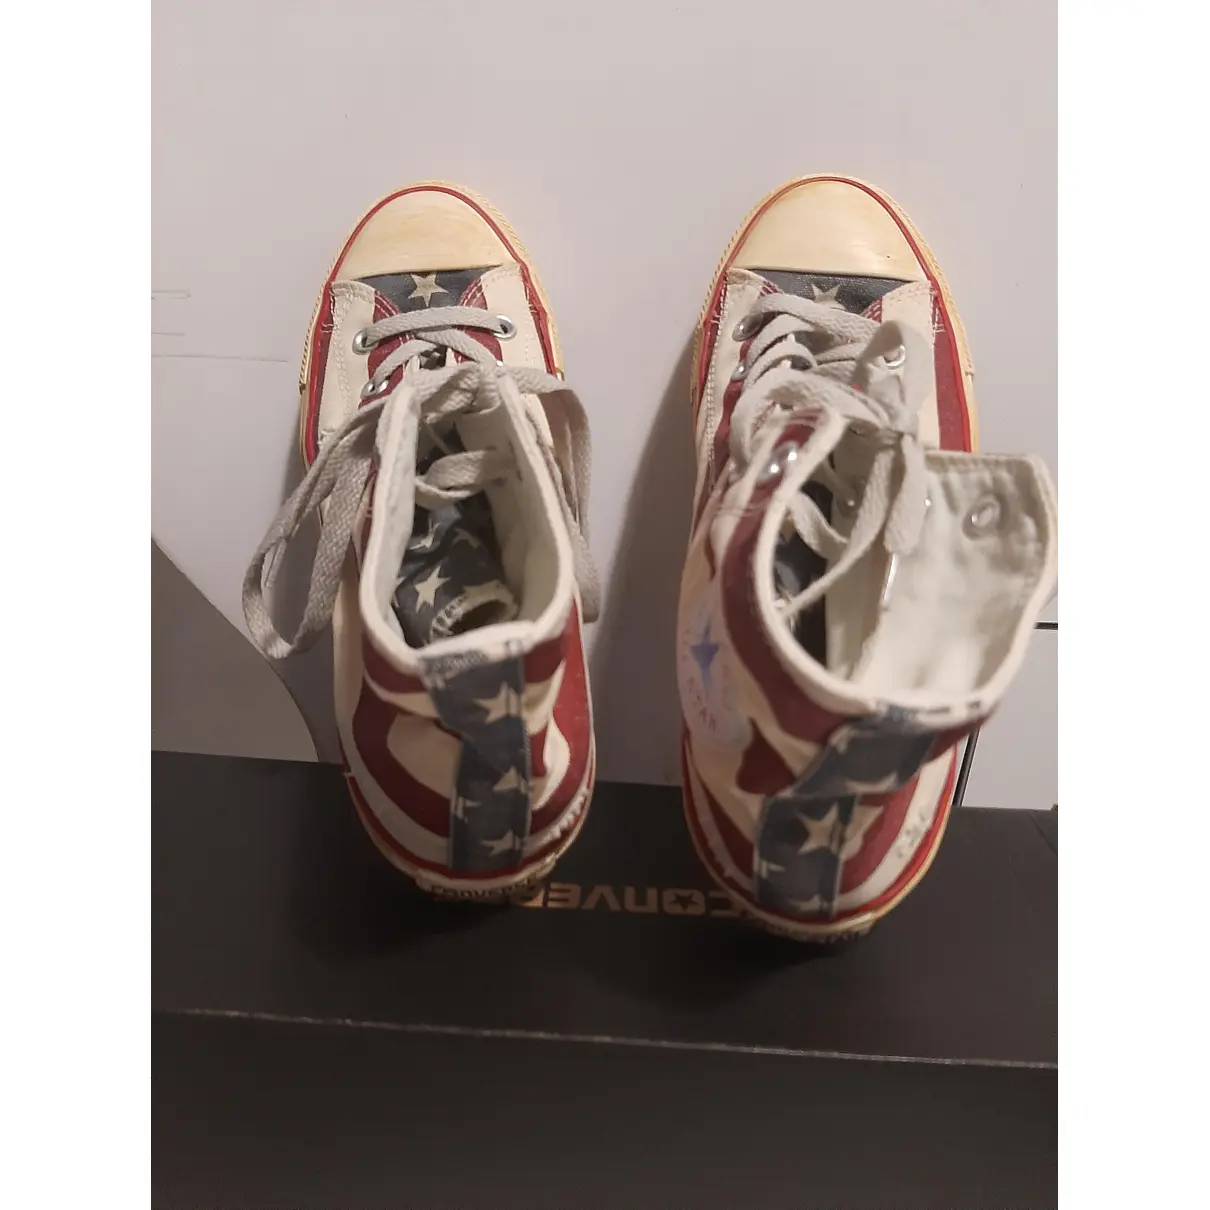 Buy Converse Cloth trainers online